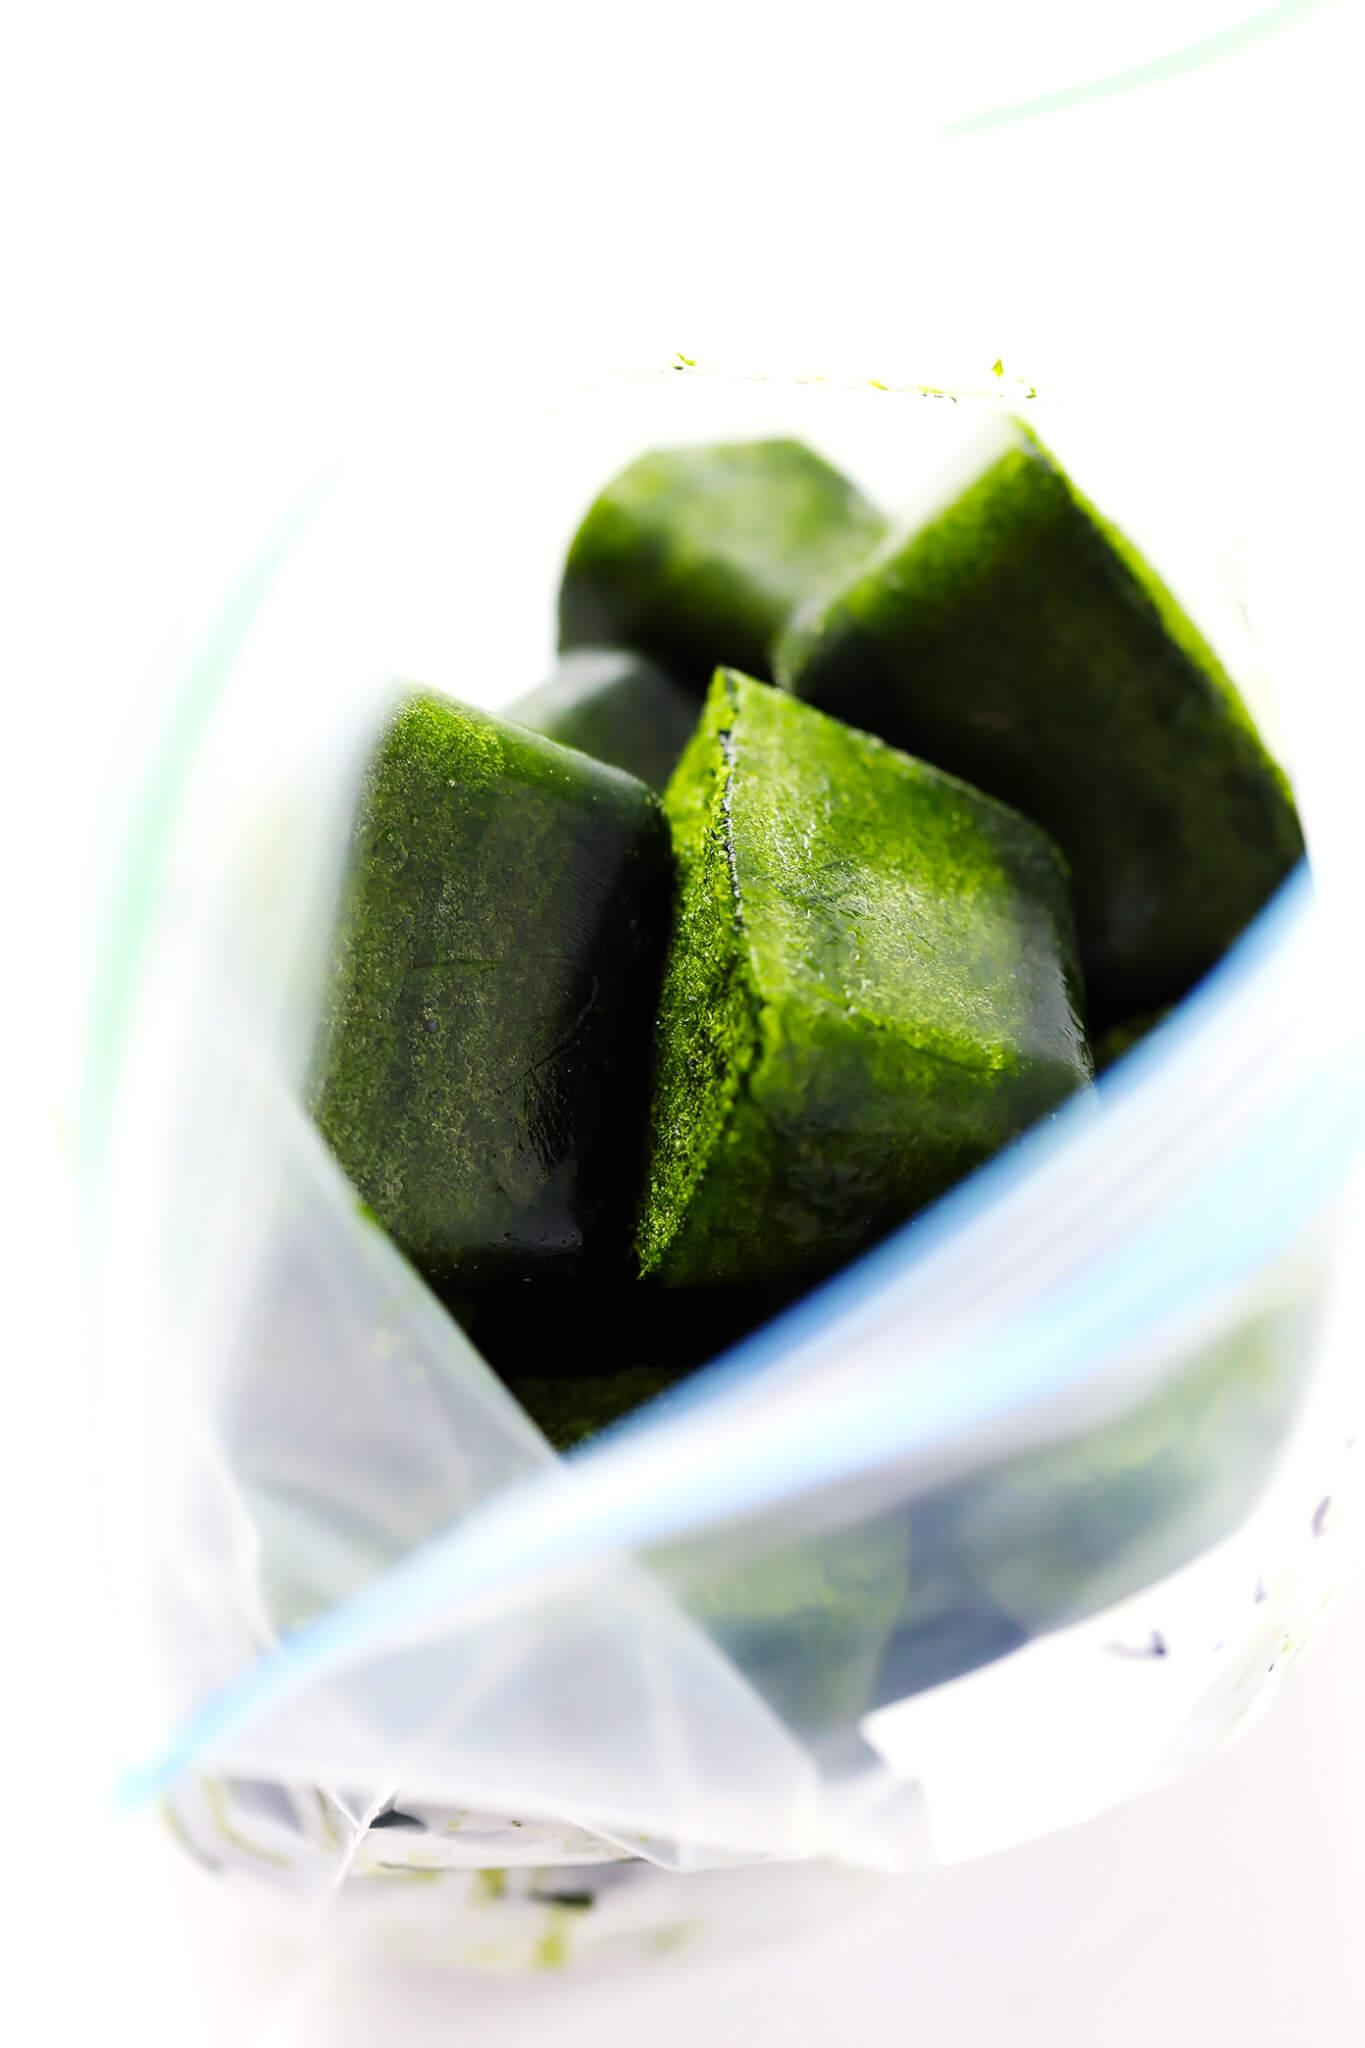 This Frozen Spinach Cubes recipe is a lifesaver! Just puree some spinach and coconut water, freeze, and add to green smoothies whenever you'd like! | gimmesomeoven.com